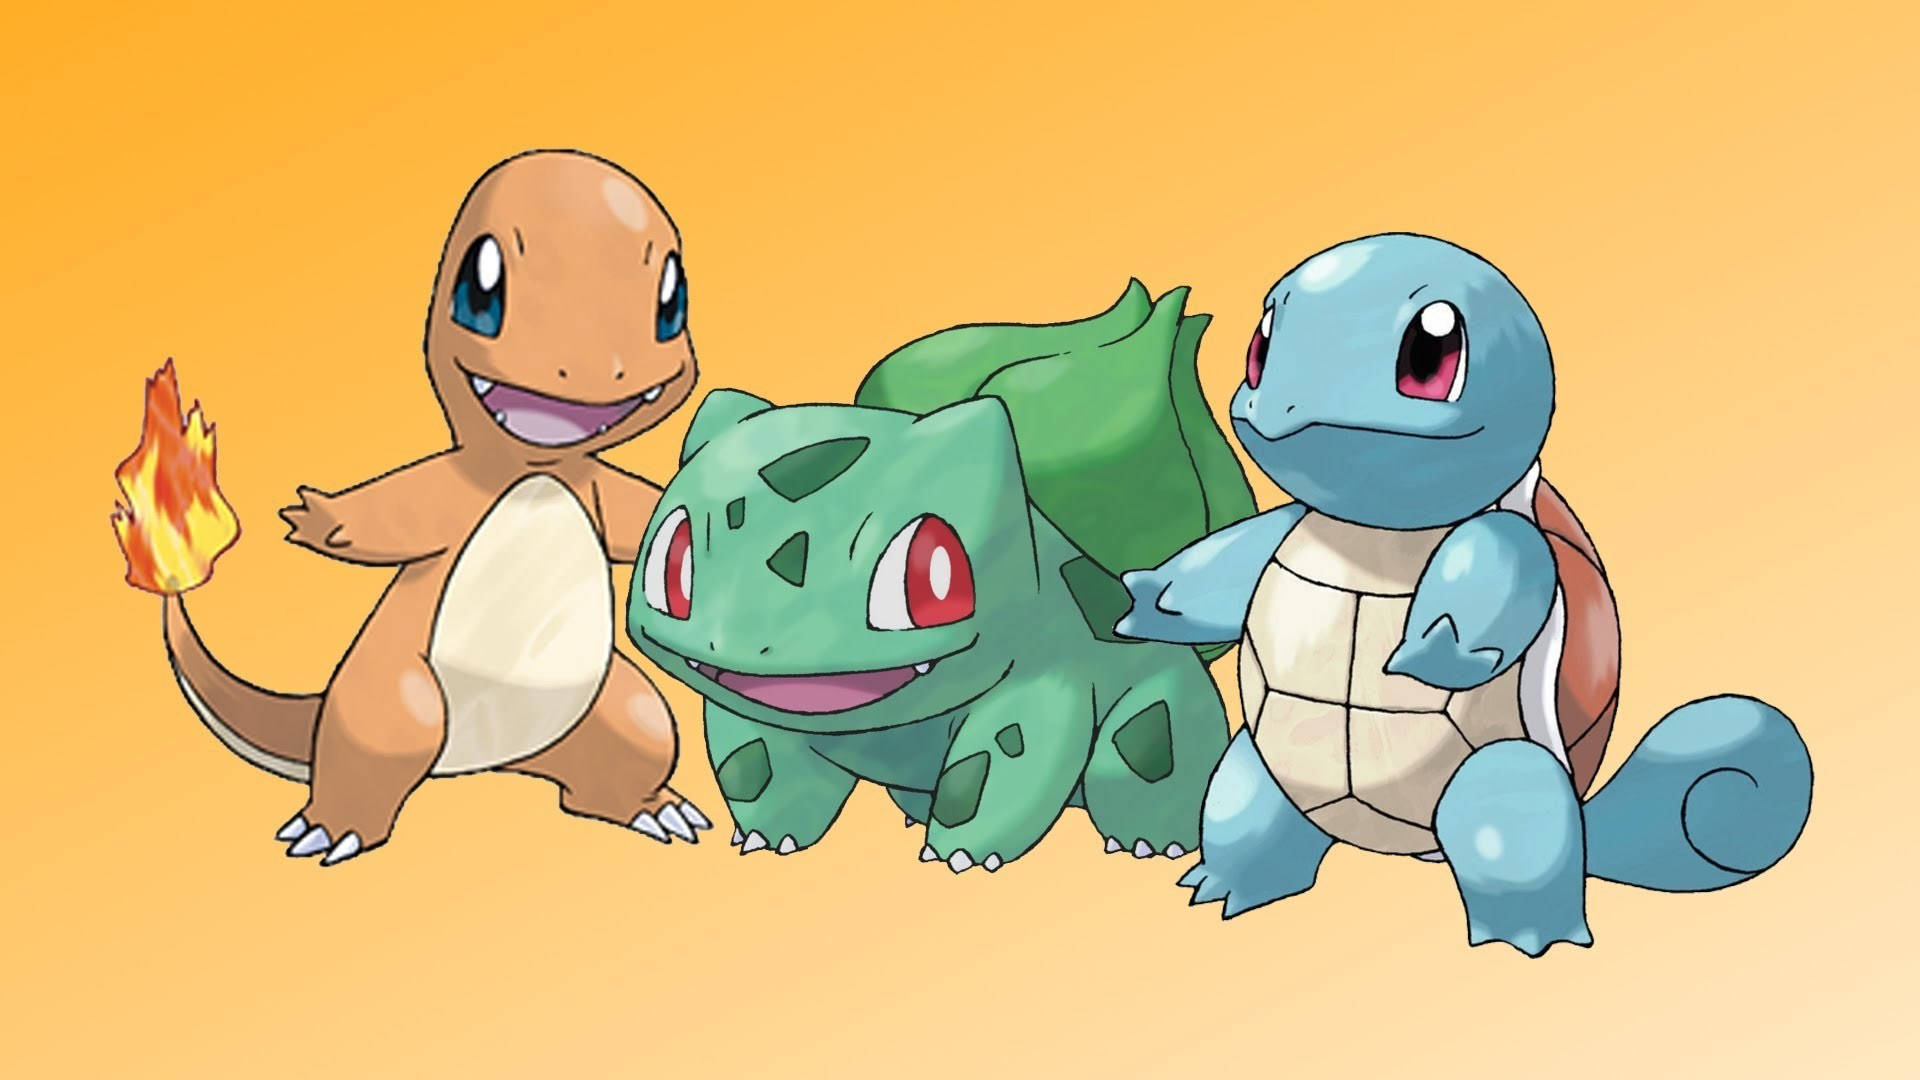 Check Out This Adorable Baby Squirtle! Background